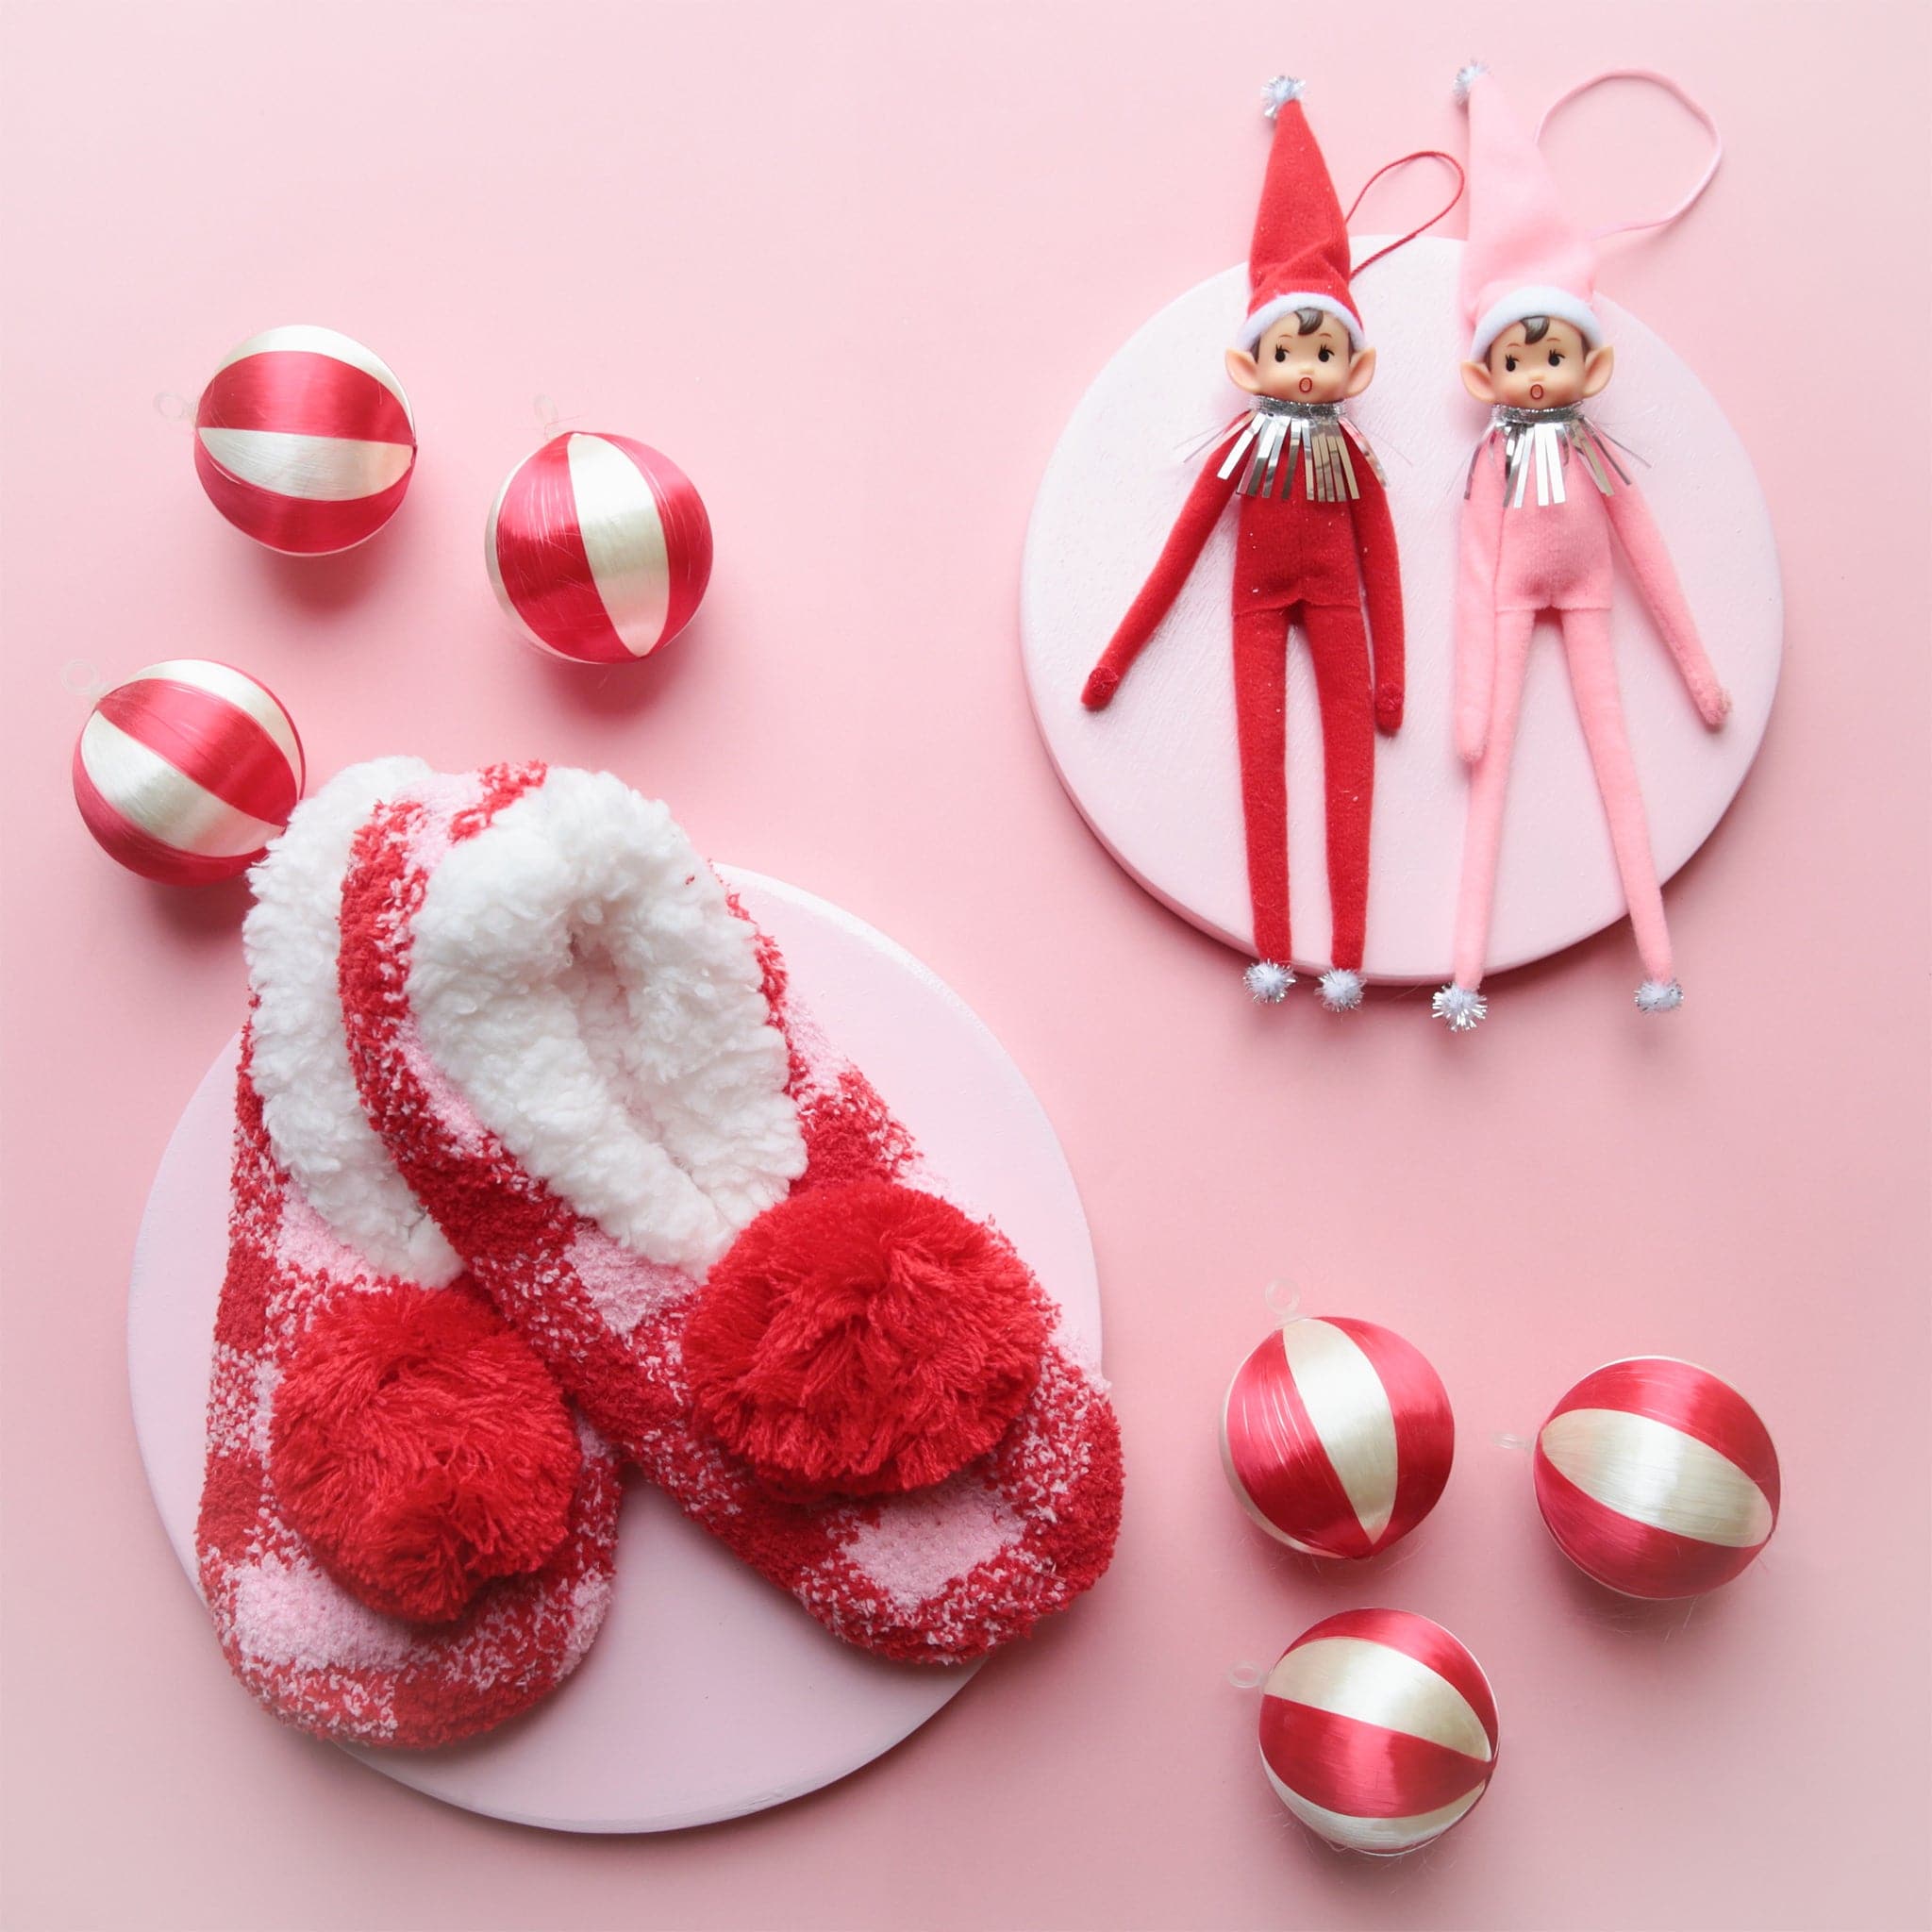 On a cream background is a elf ornament with long arms and legs with a pink suit and hat on as well as a pink string loop for hanging and photographed here next to the red version. 